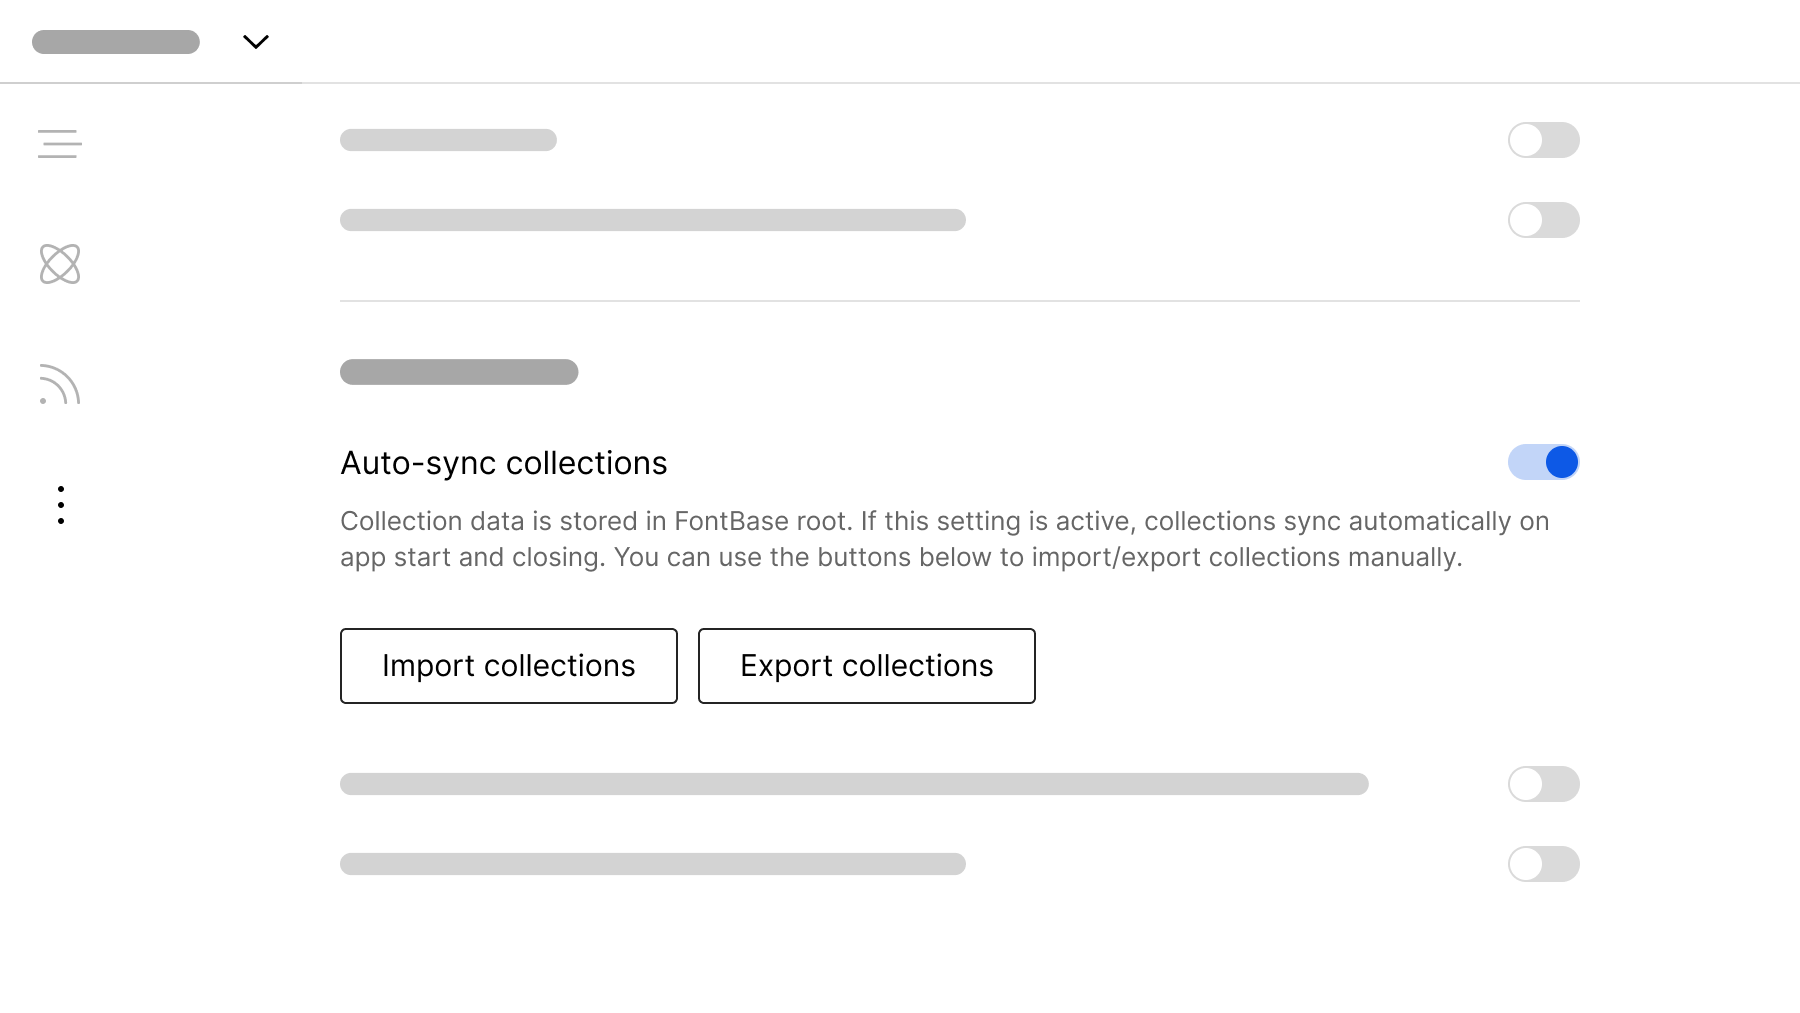 Activate collections auto-sync in settings